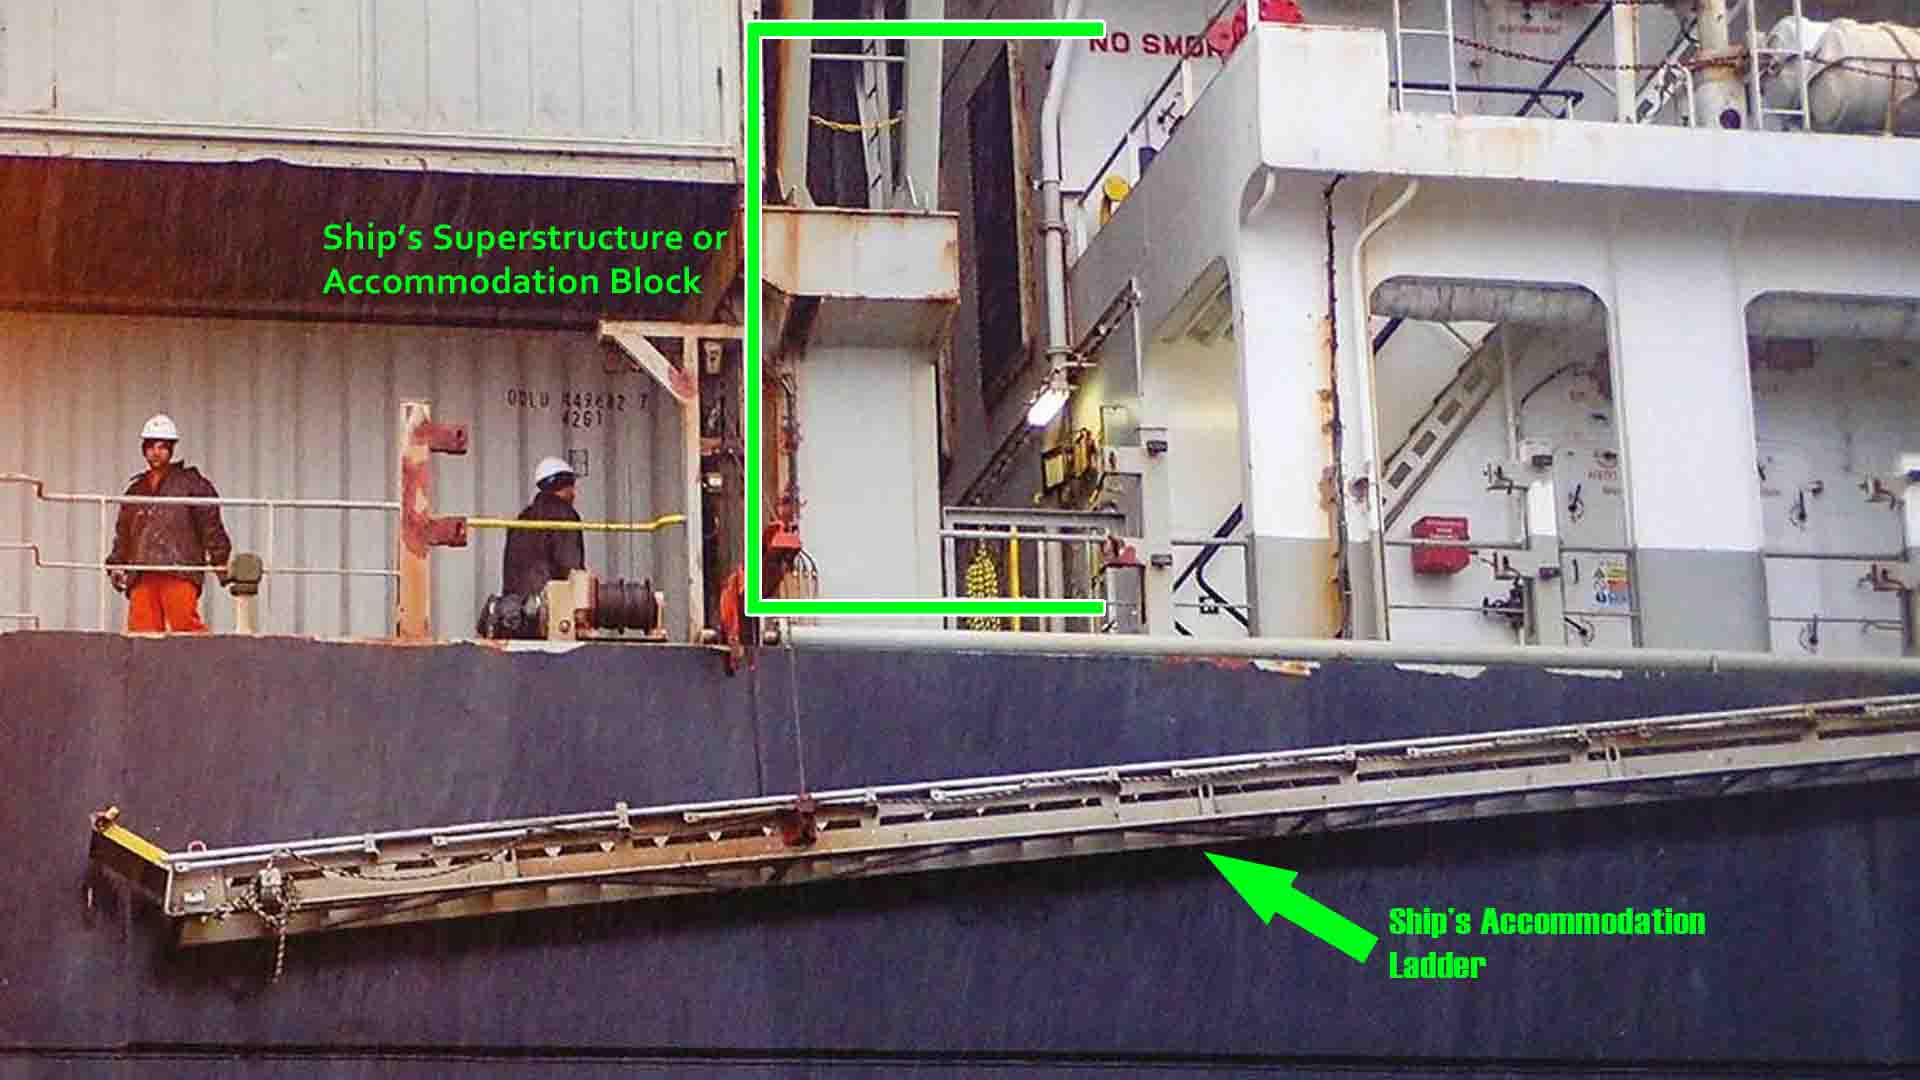 Crew preparing to rig the accommodation ladder. The ladder is located near the ship's accommodation block.